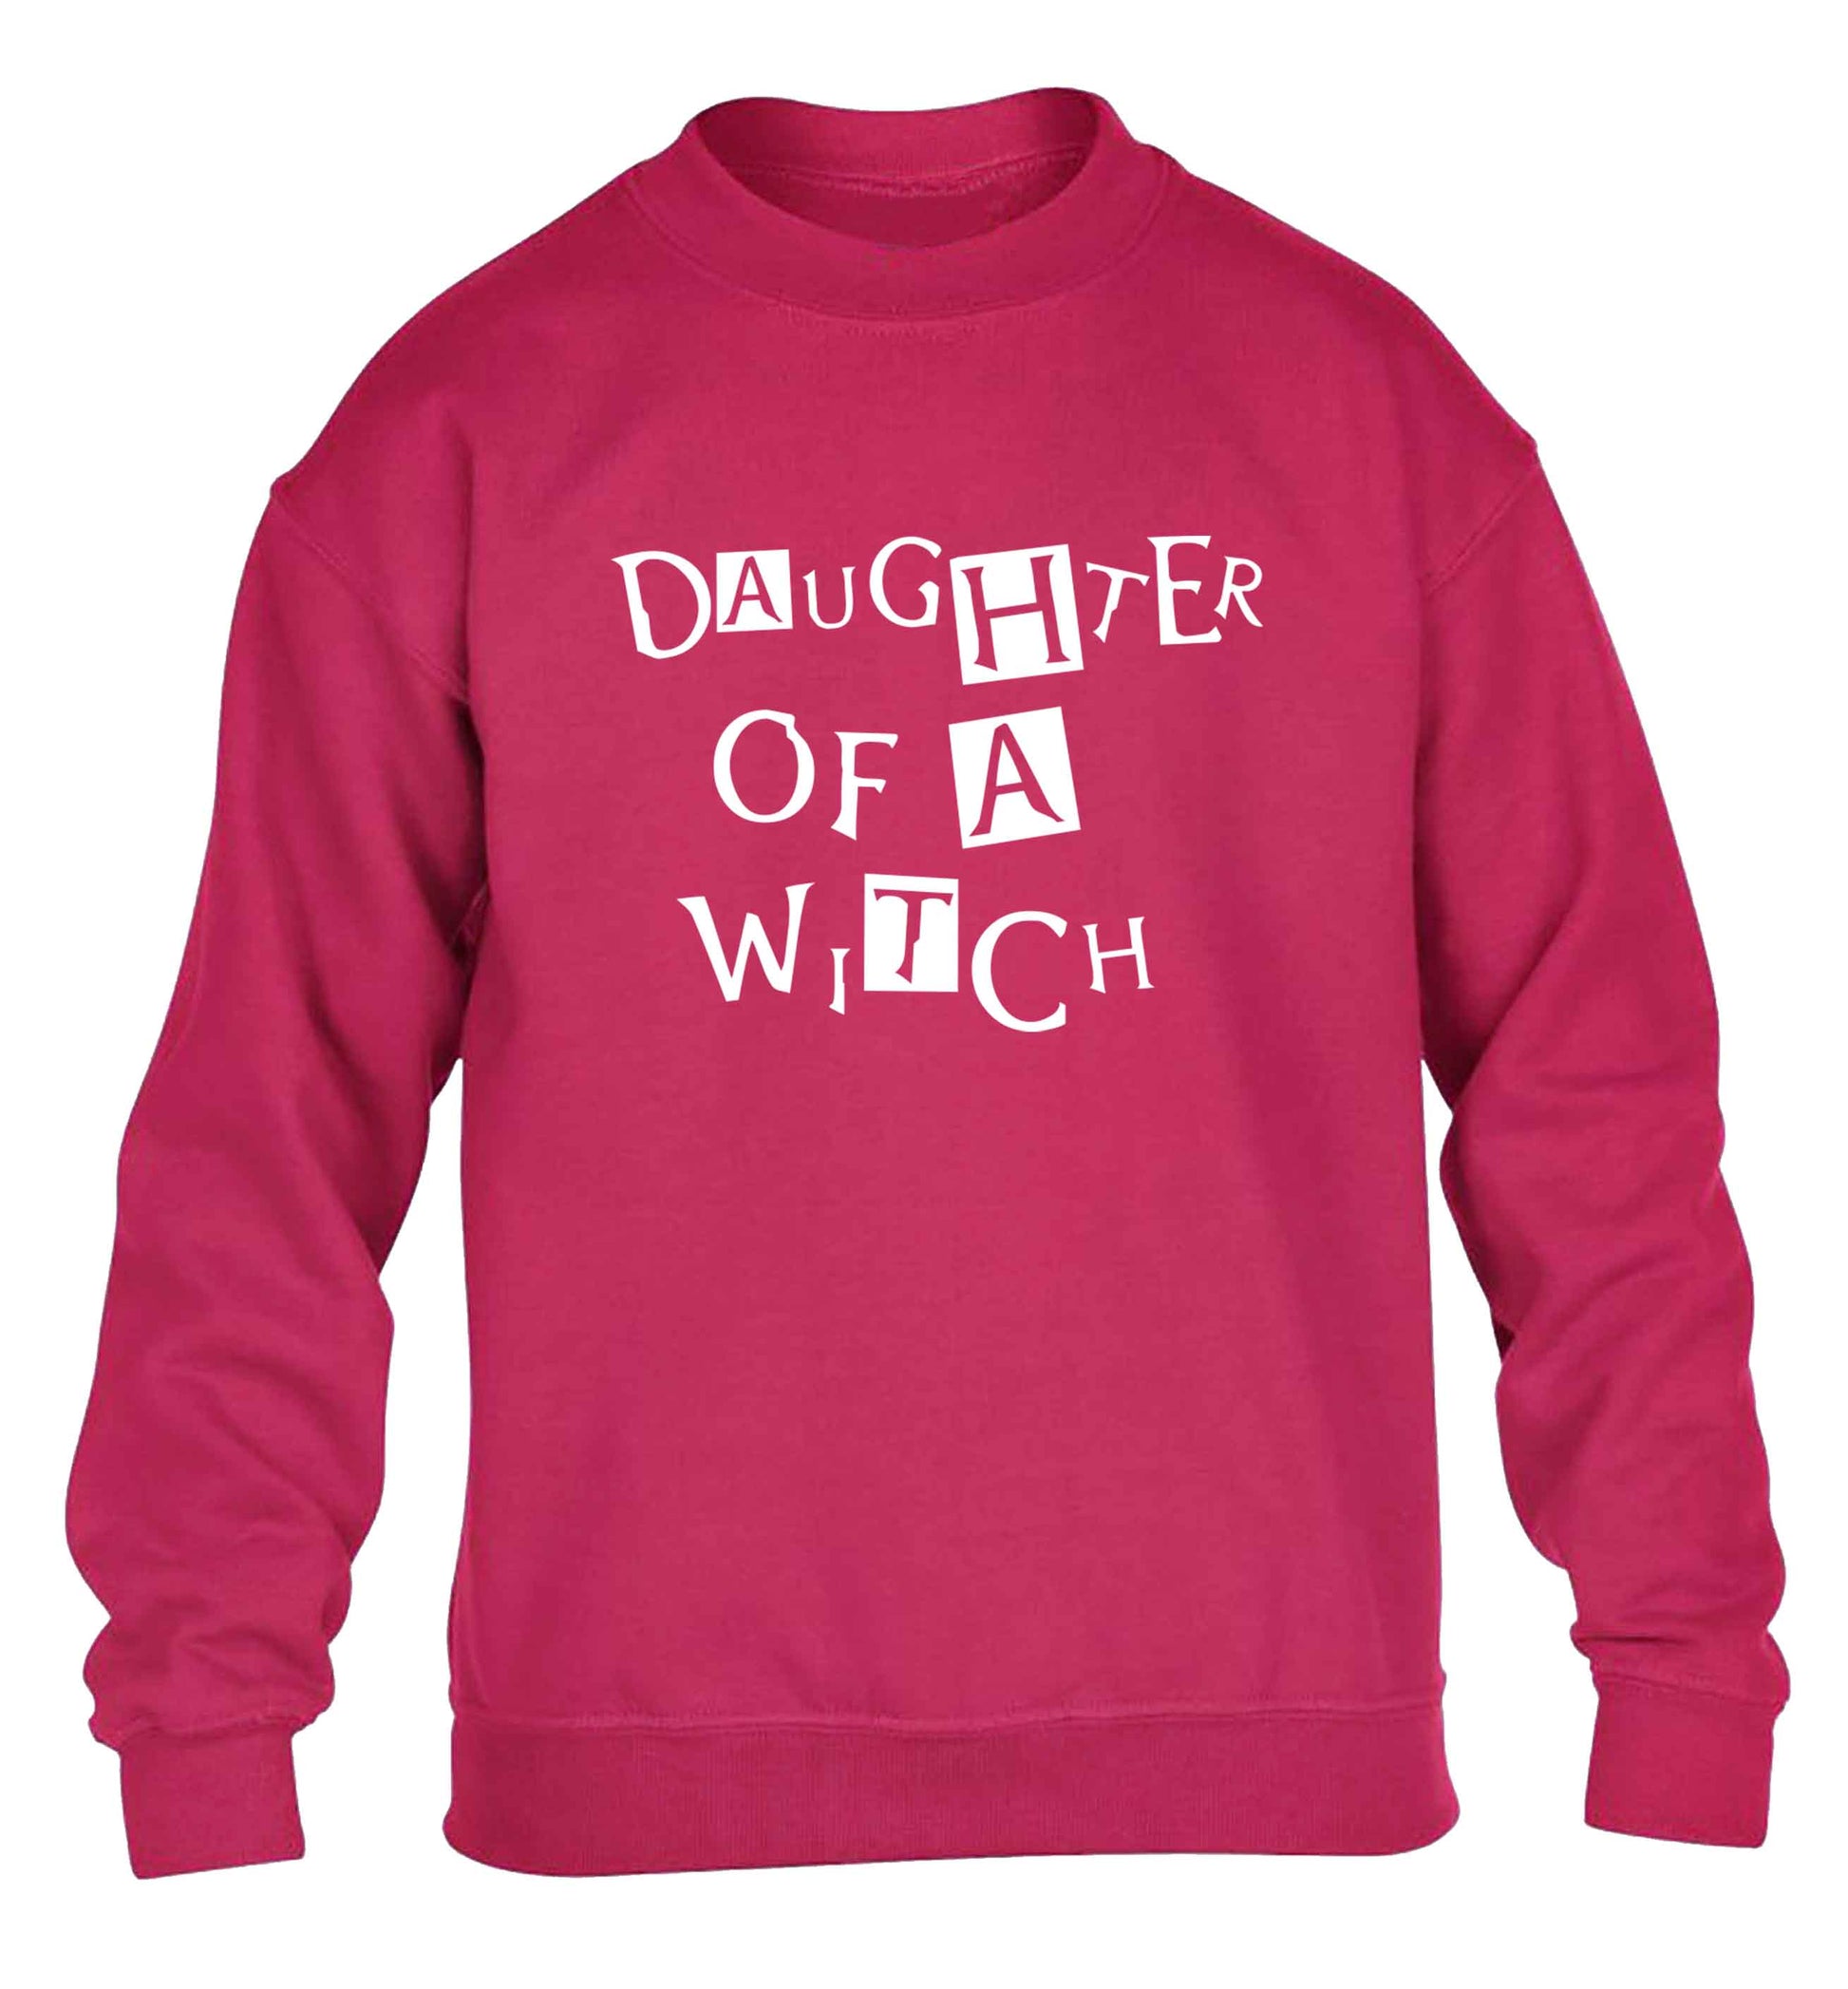 Daughter of a witch children's pink sweater 12-13 Years